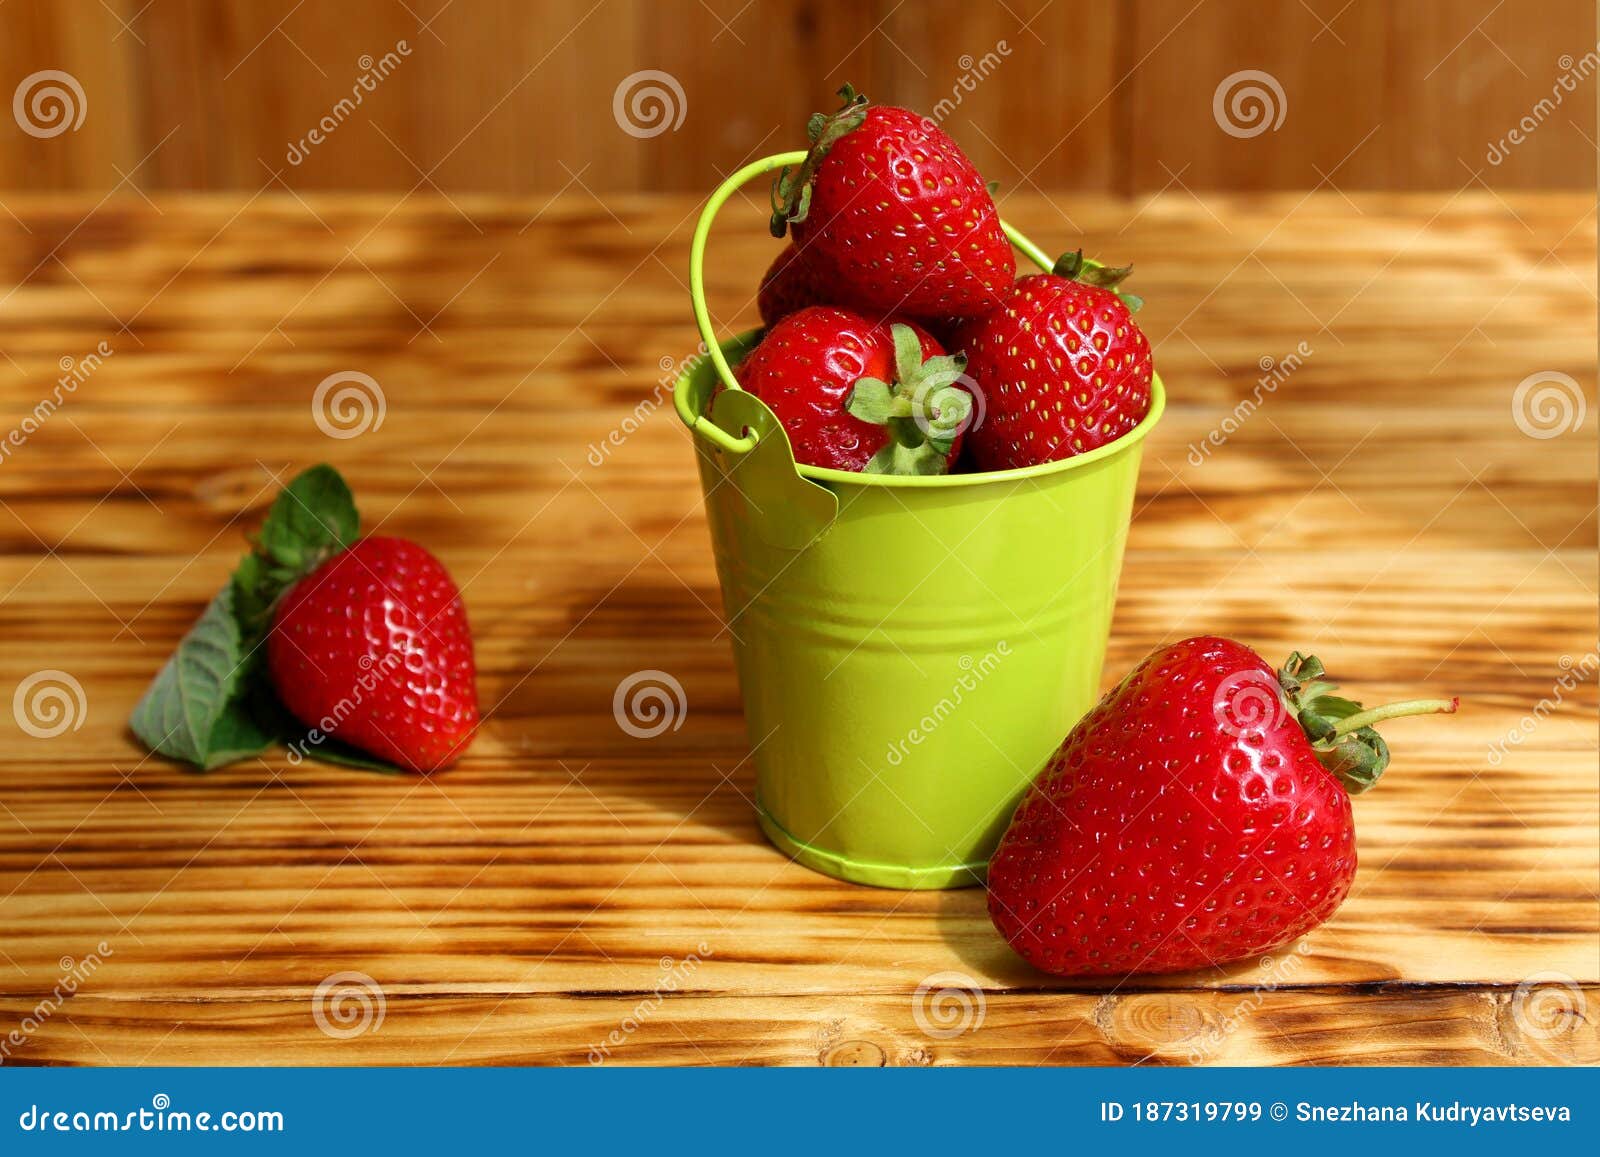 Small Bucket with a Red, Juicy Klubnika Stock Image - Image of handful,  nutrition: 187319799